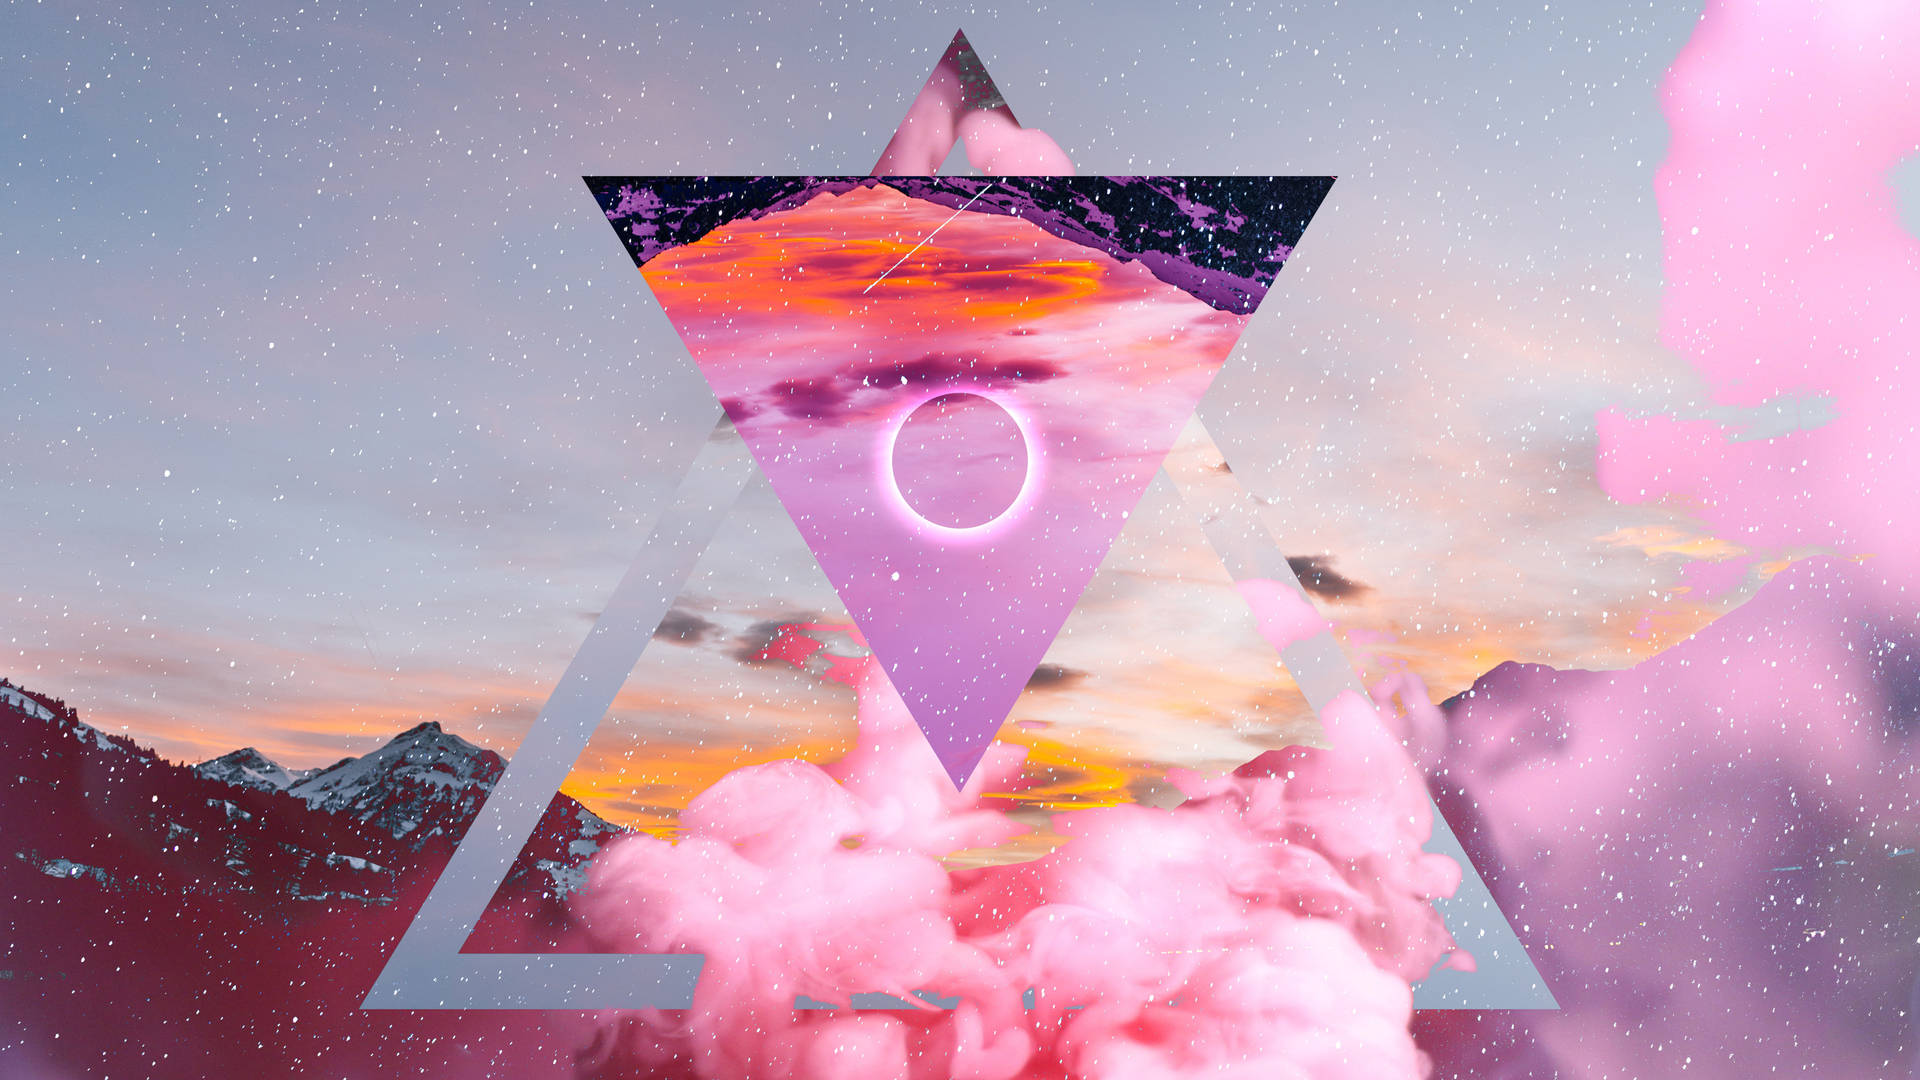 4d Ultra Hd Pink Opposing Triangles